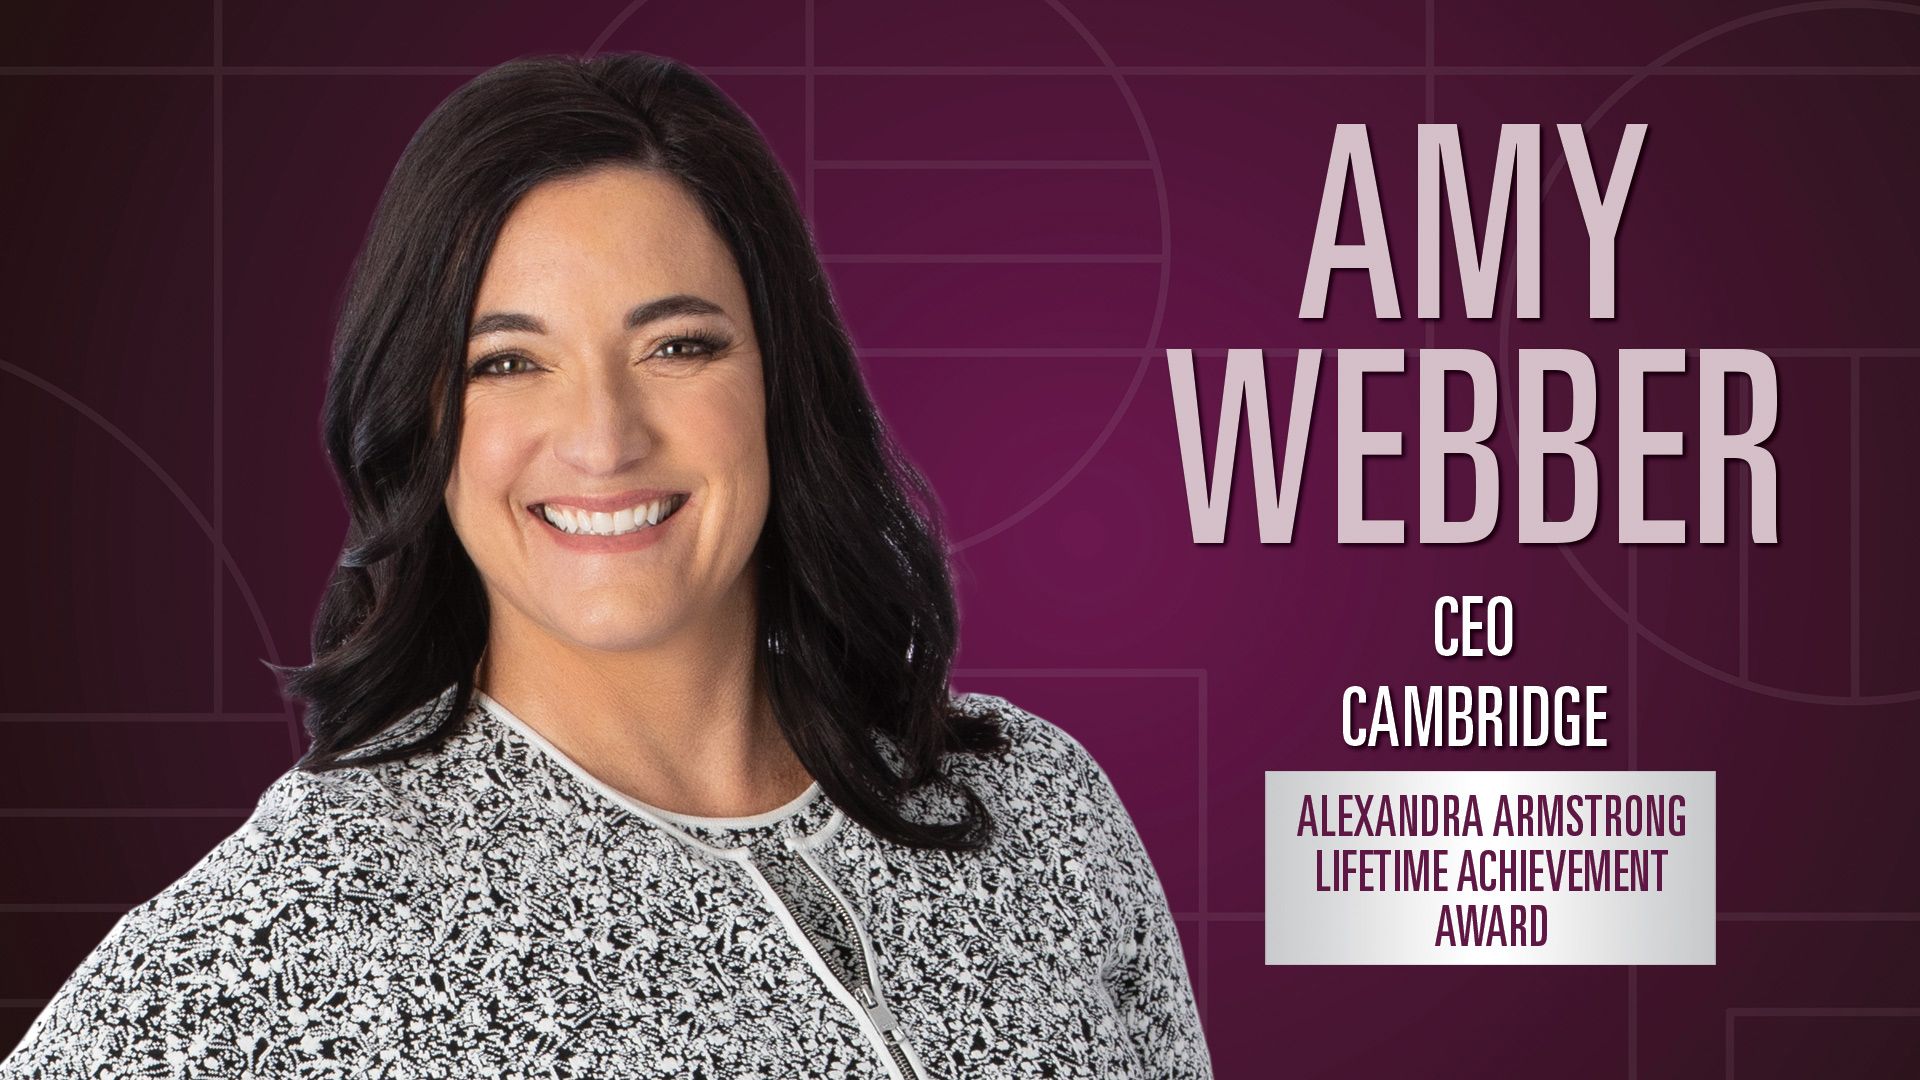 InvestmentNews recognizes the achievements of Amy Webber